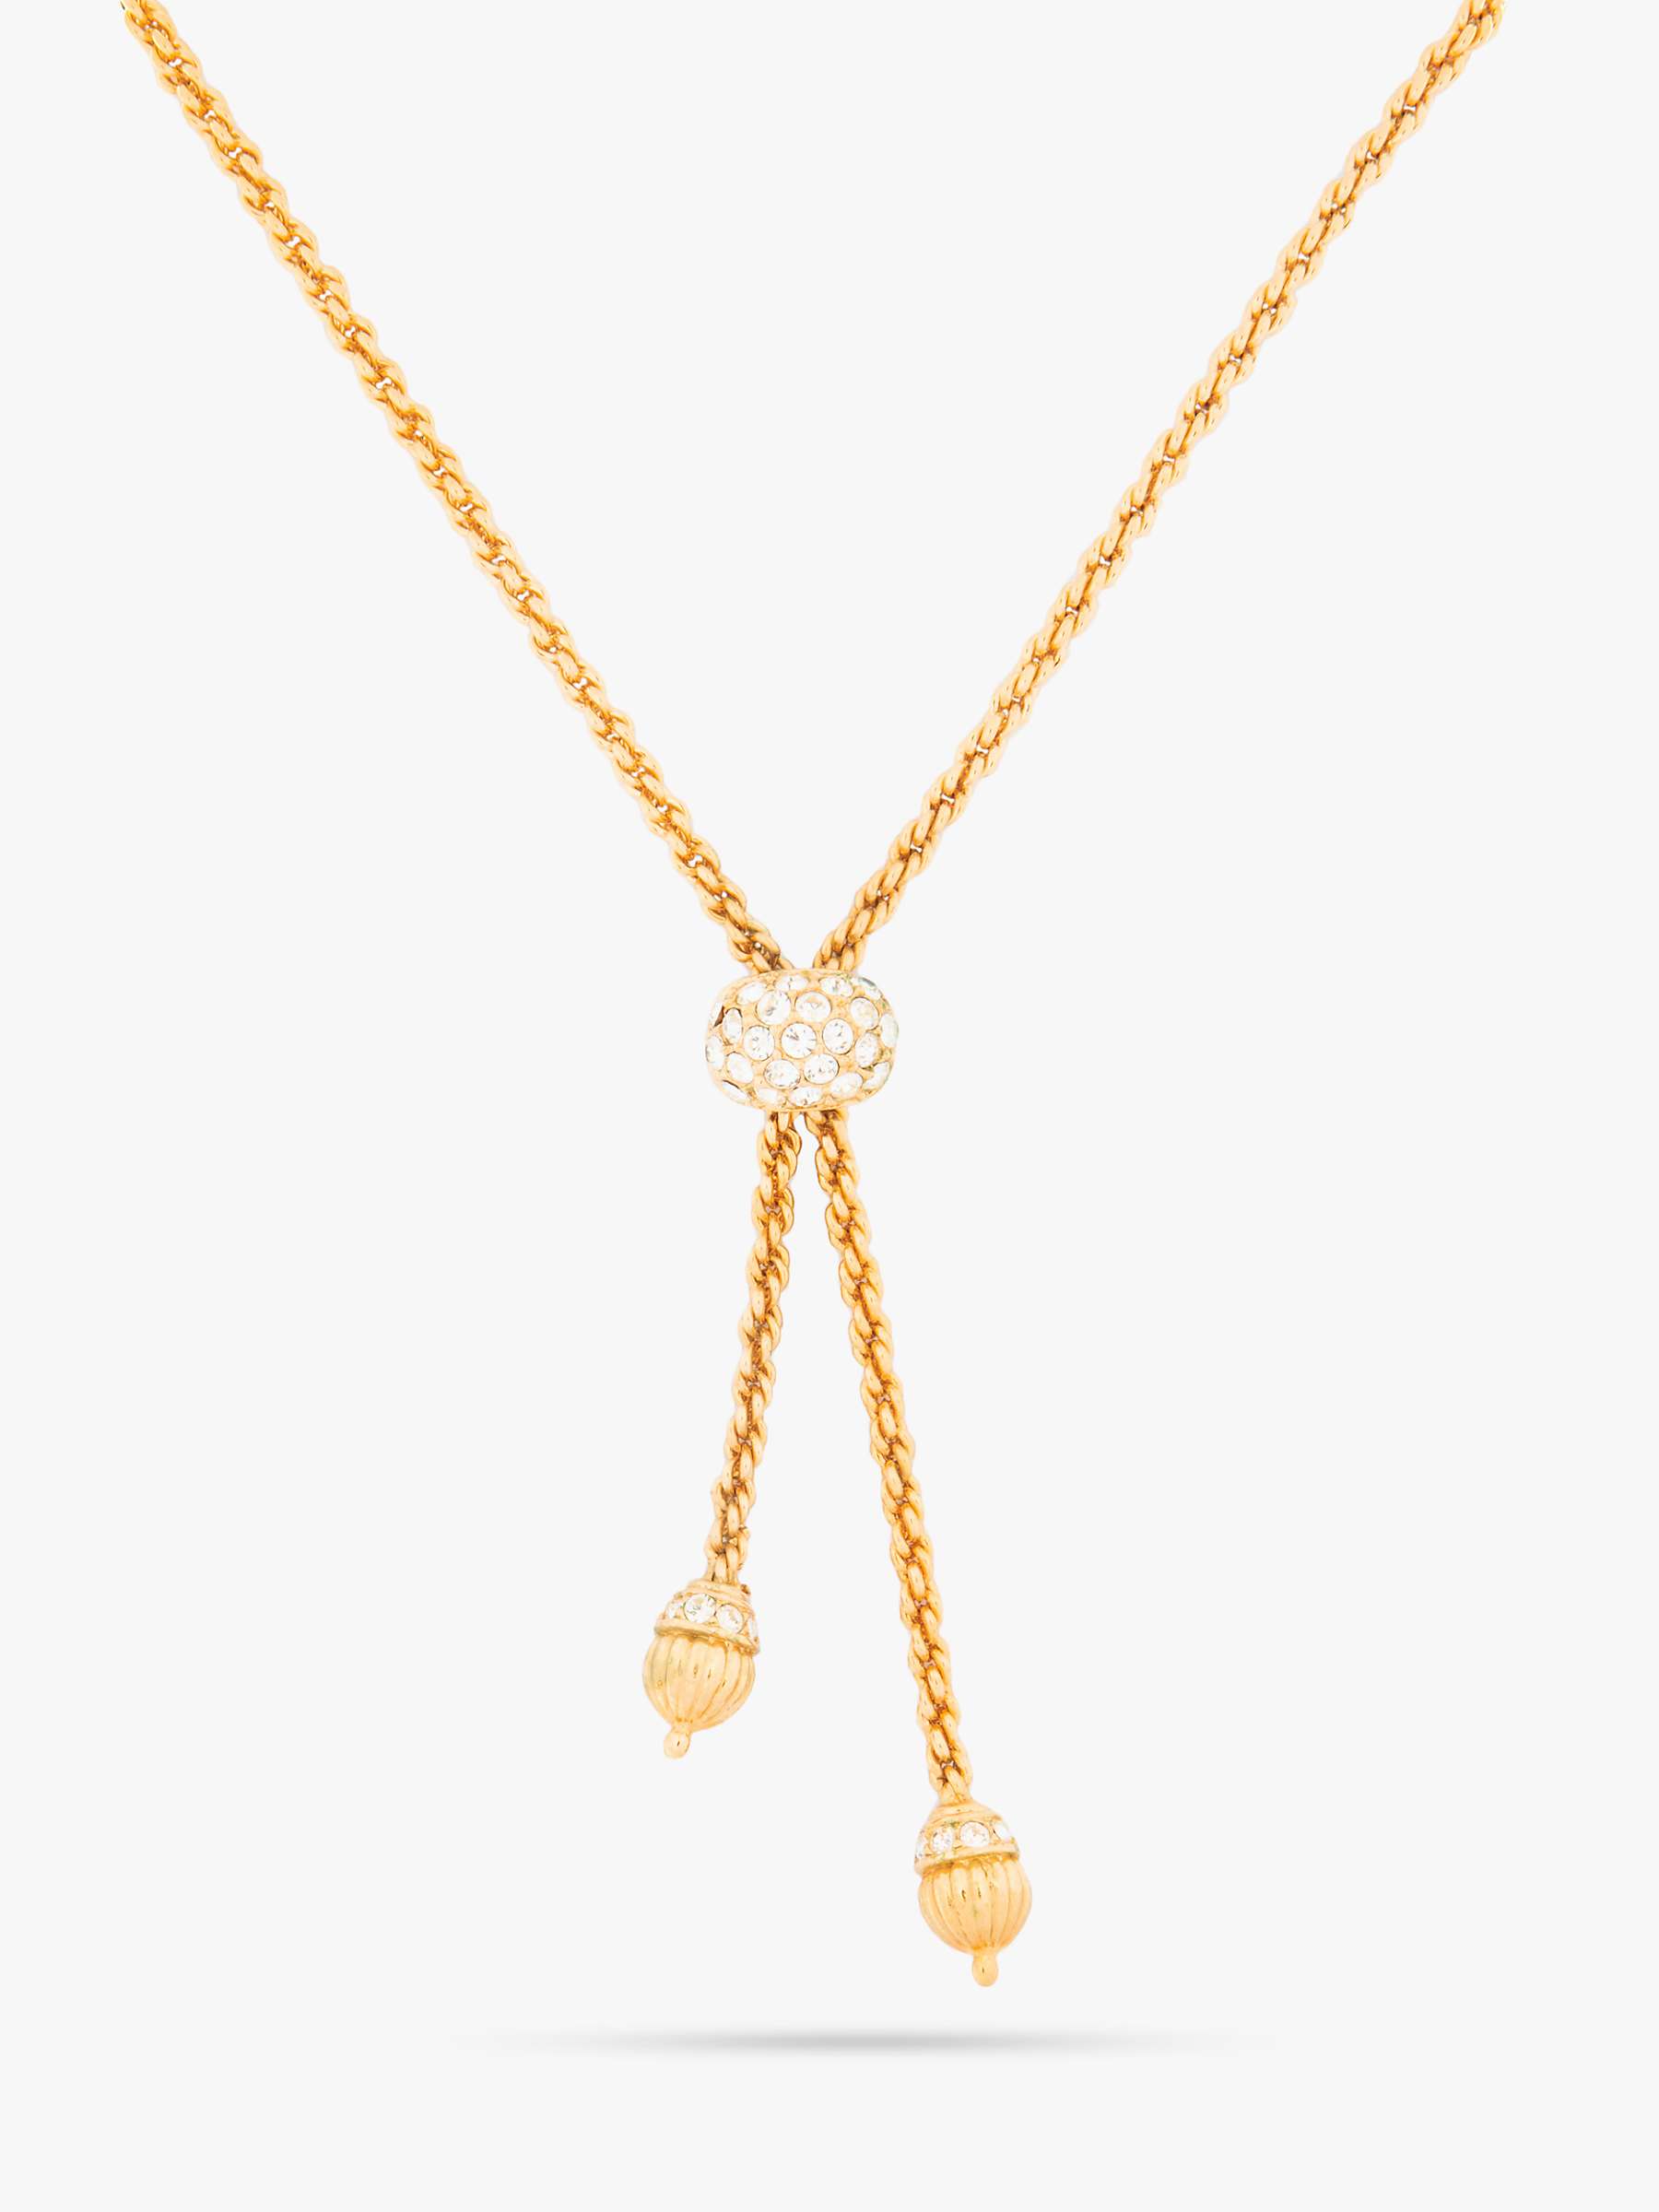 Buy Eclectica Vintage Attwood & Sawyer Gold Plated Swarovski Crystal Lariat Chain Necklace, Dated Circa 1980s Online at johnlewis.com